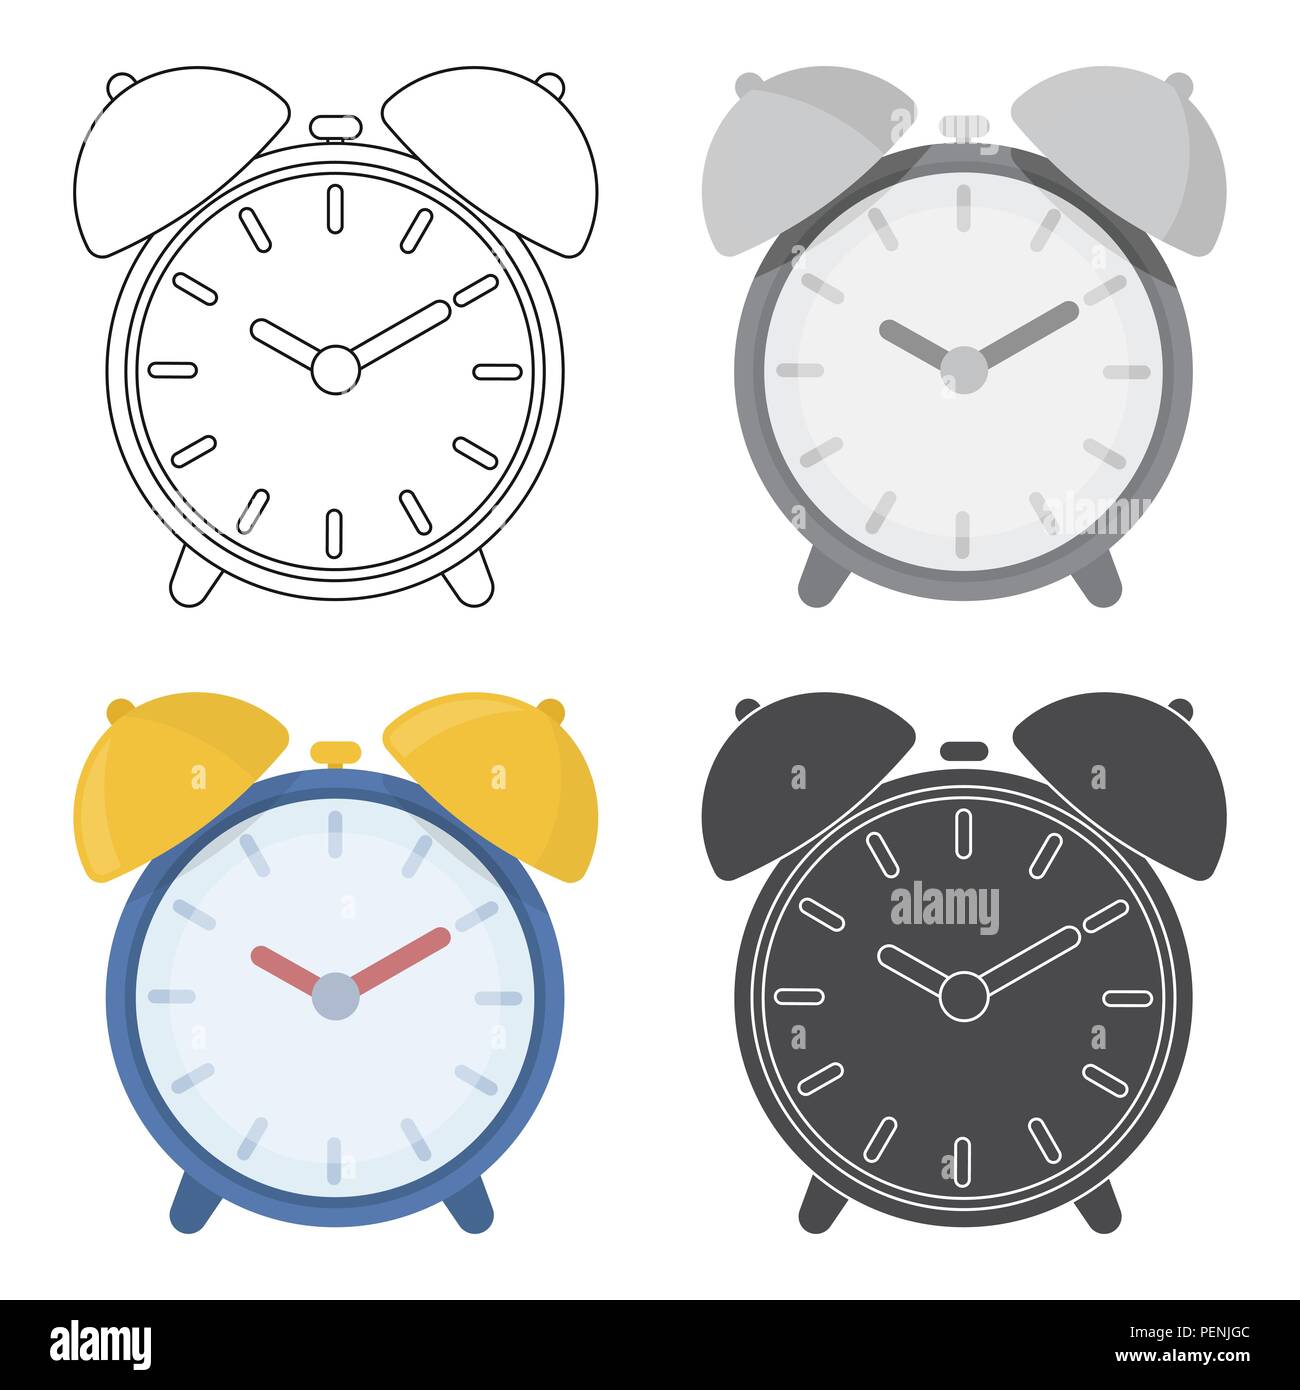 Vintage Wall Clock Vector Design Illustration Isolated On White Background  Stock Illustration - Download Image Now - iStock